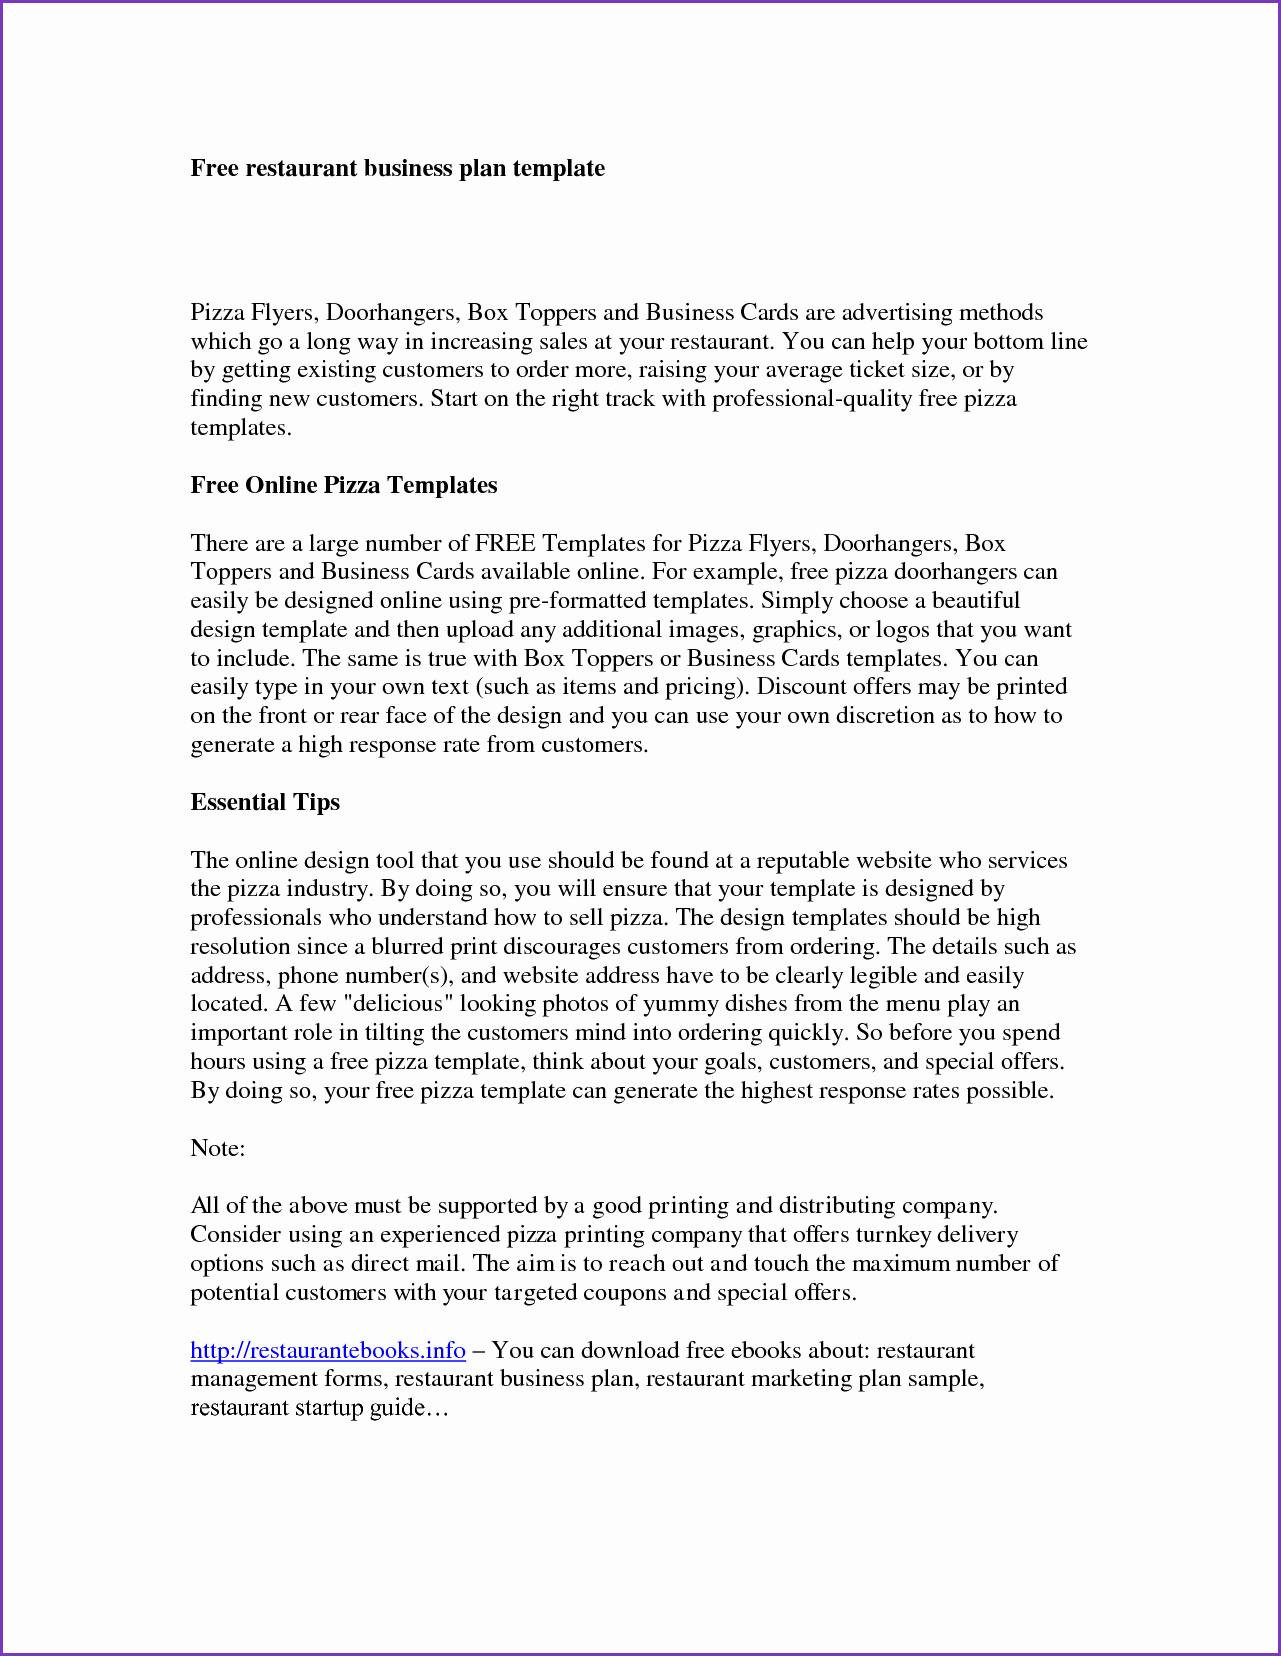 026 Business Plan Feasibility Study Template Doc Unique Great Restaurant Throughout Sample